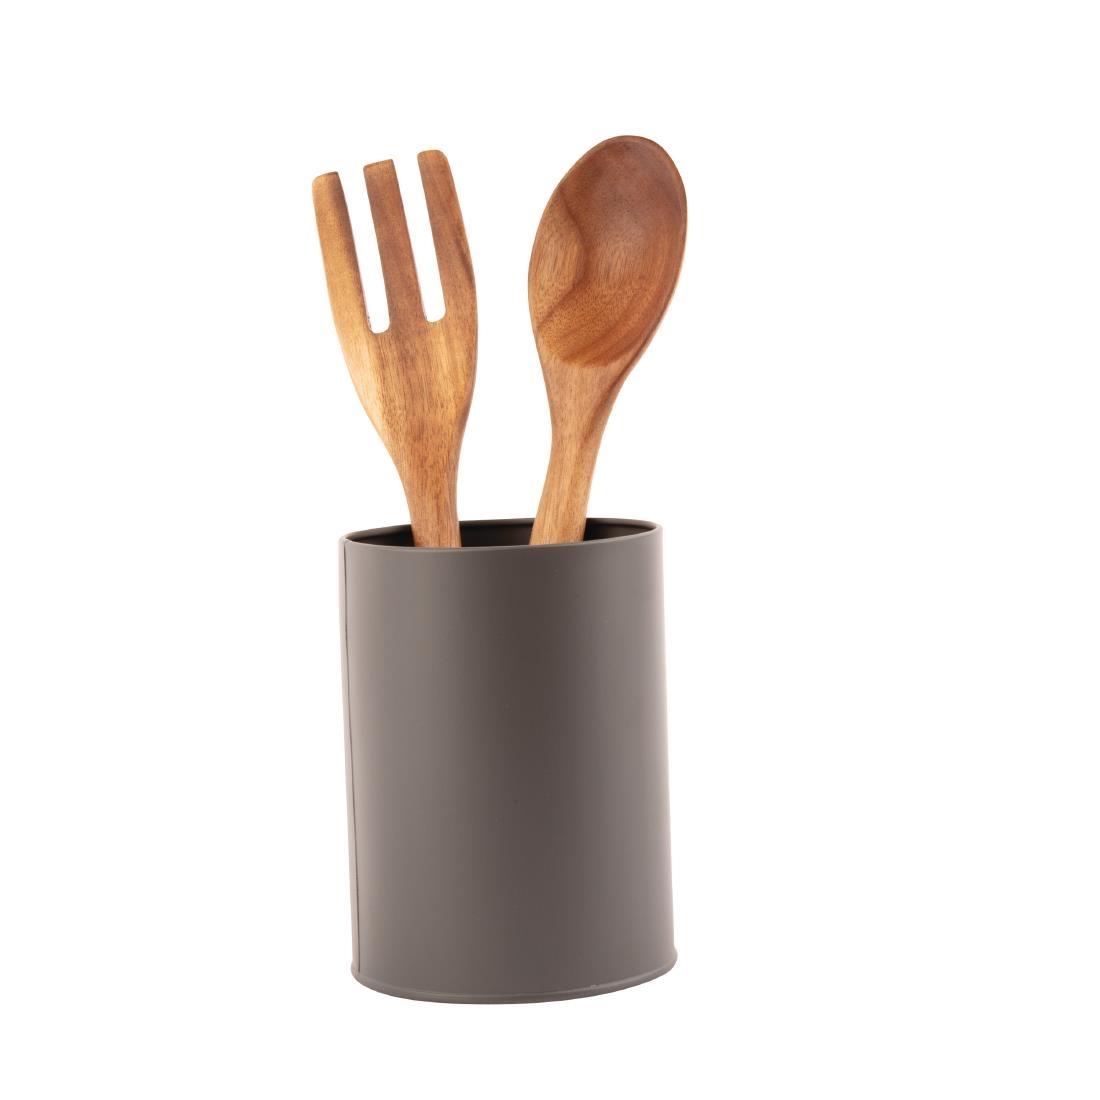 Olympia Wooden Salad Tong and Spoon Set - CN691  - 4